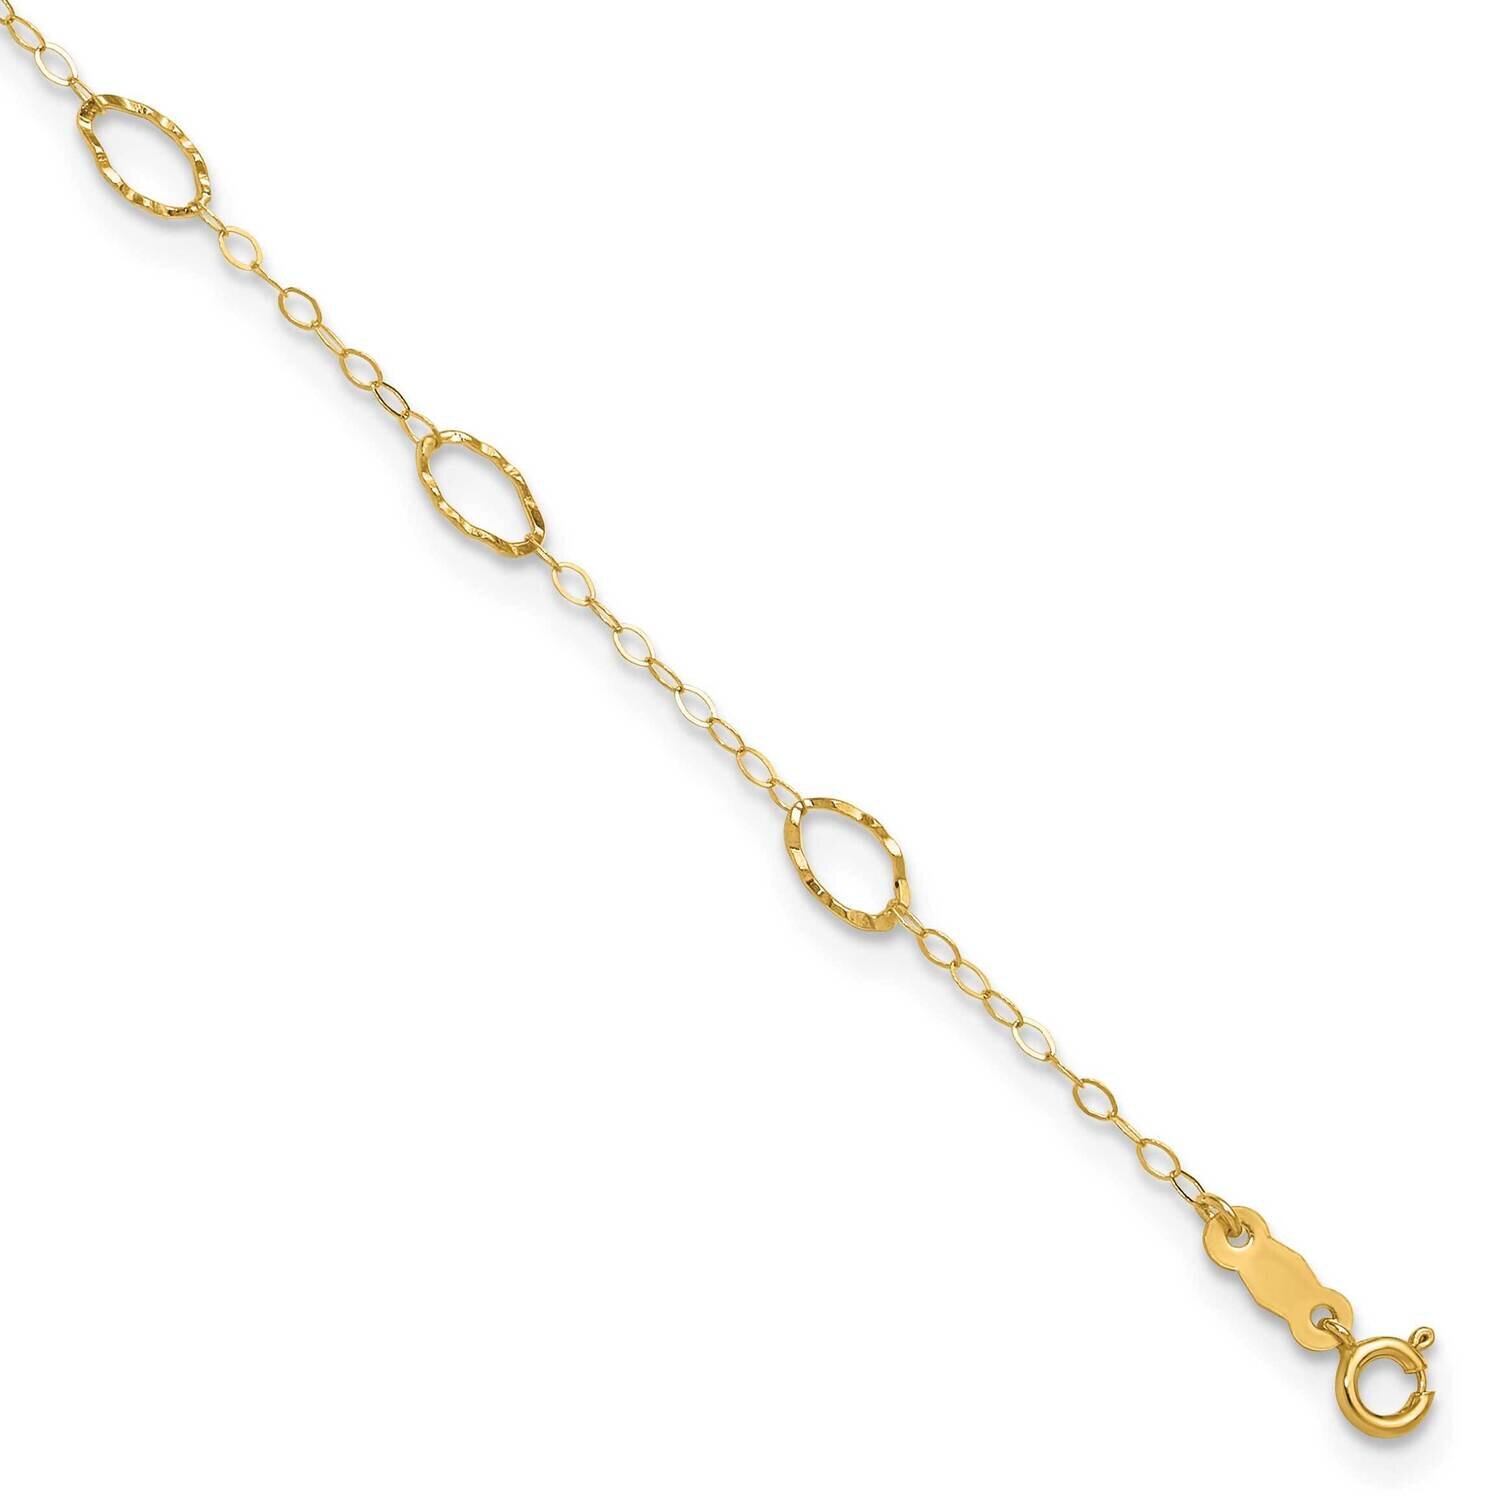 Oval Shapes 10In Plus 1Inch Extension Anklet 14k Gold ANK223-11